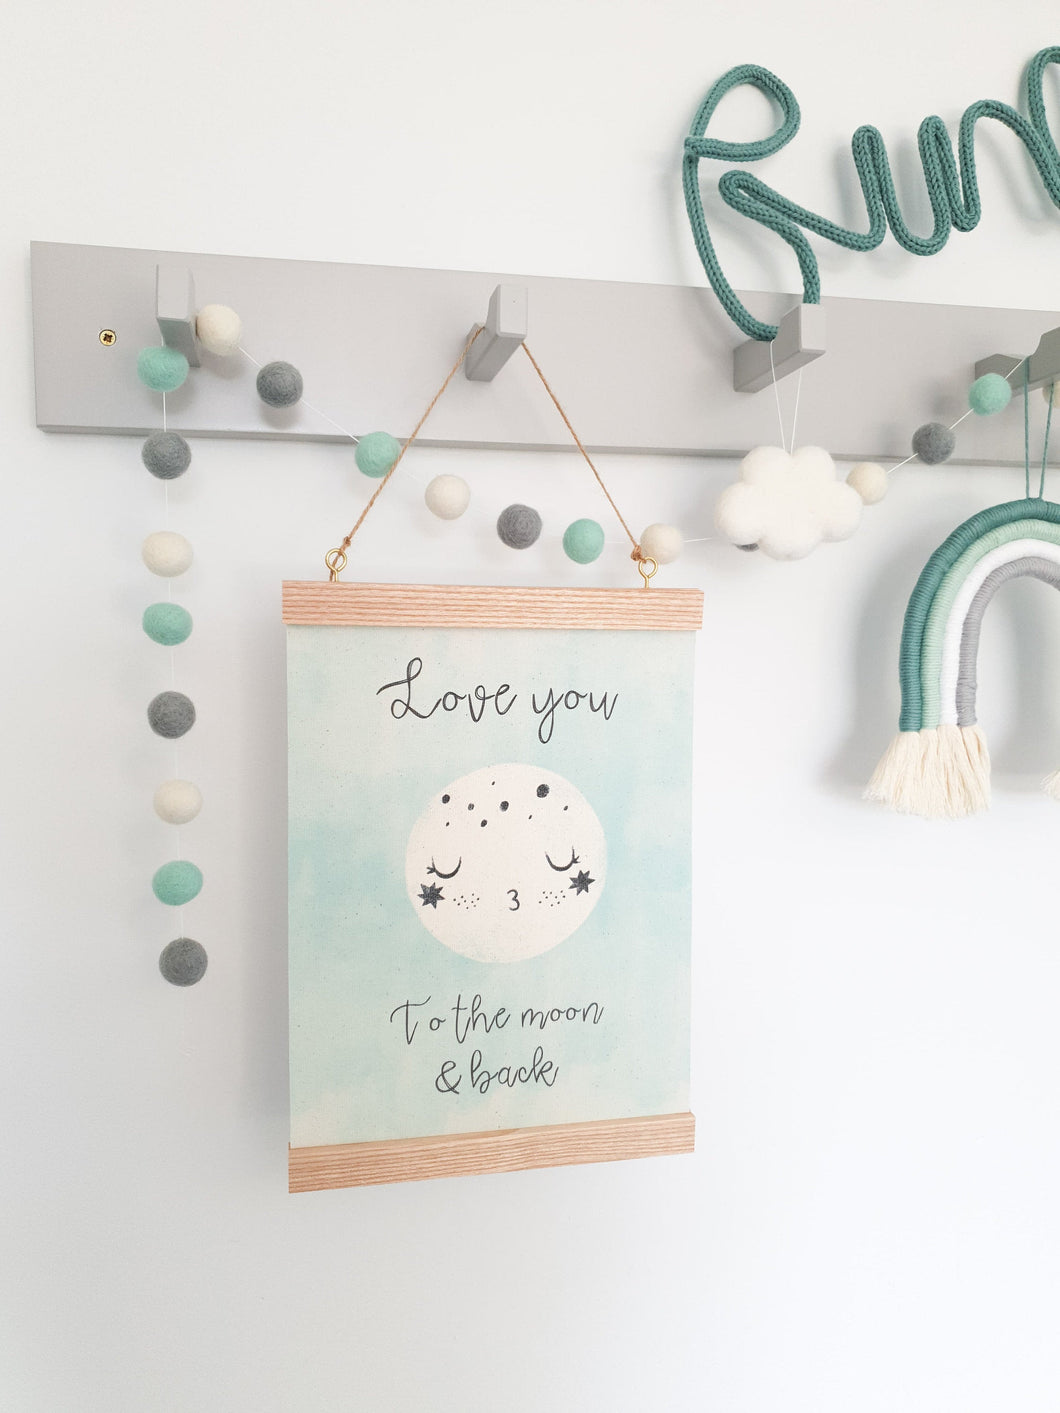 Love you to the moon canvas print with wooden hanger - Moon nursery accessory - Moon bedroom accessory - Wooden Print hanger - Mint nursery